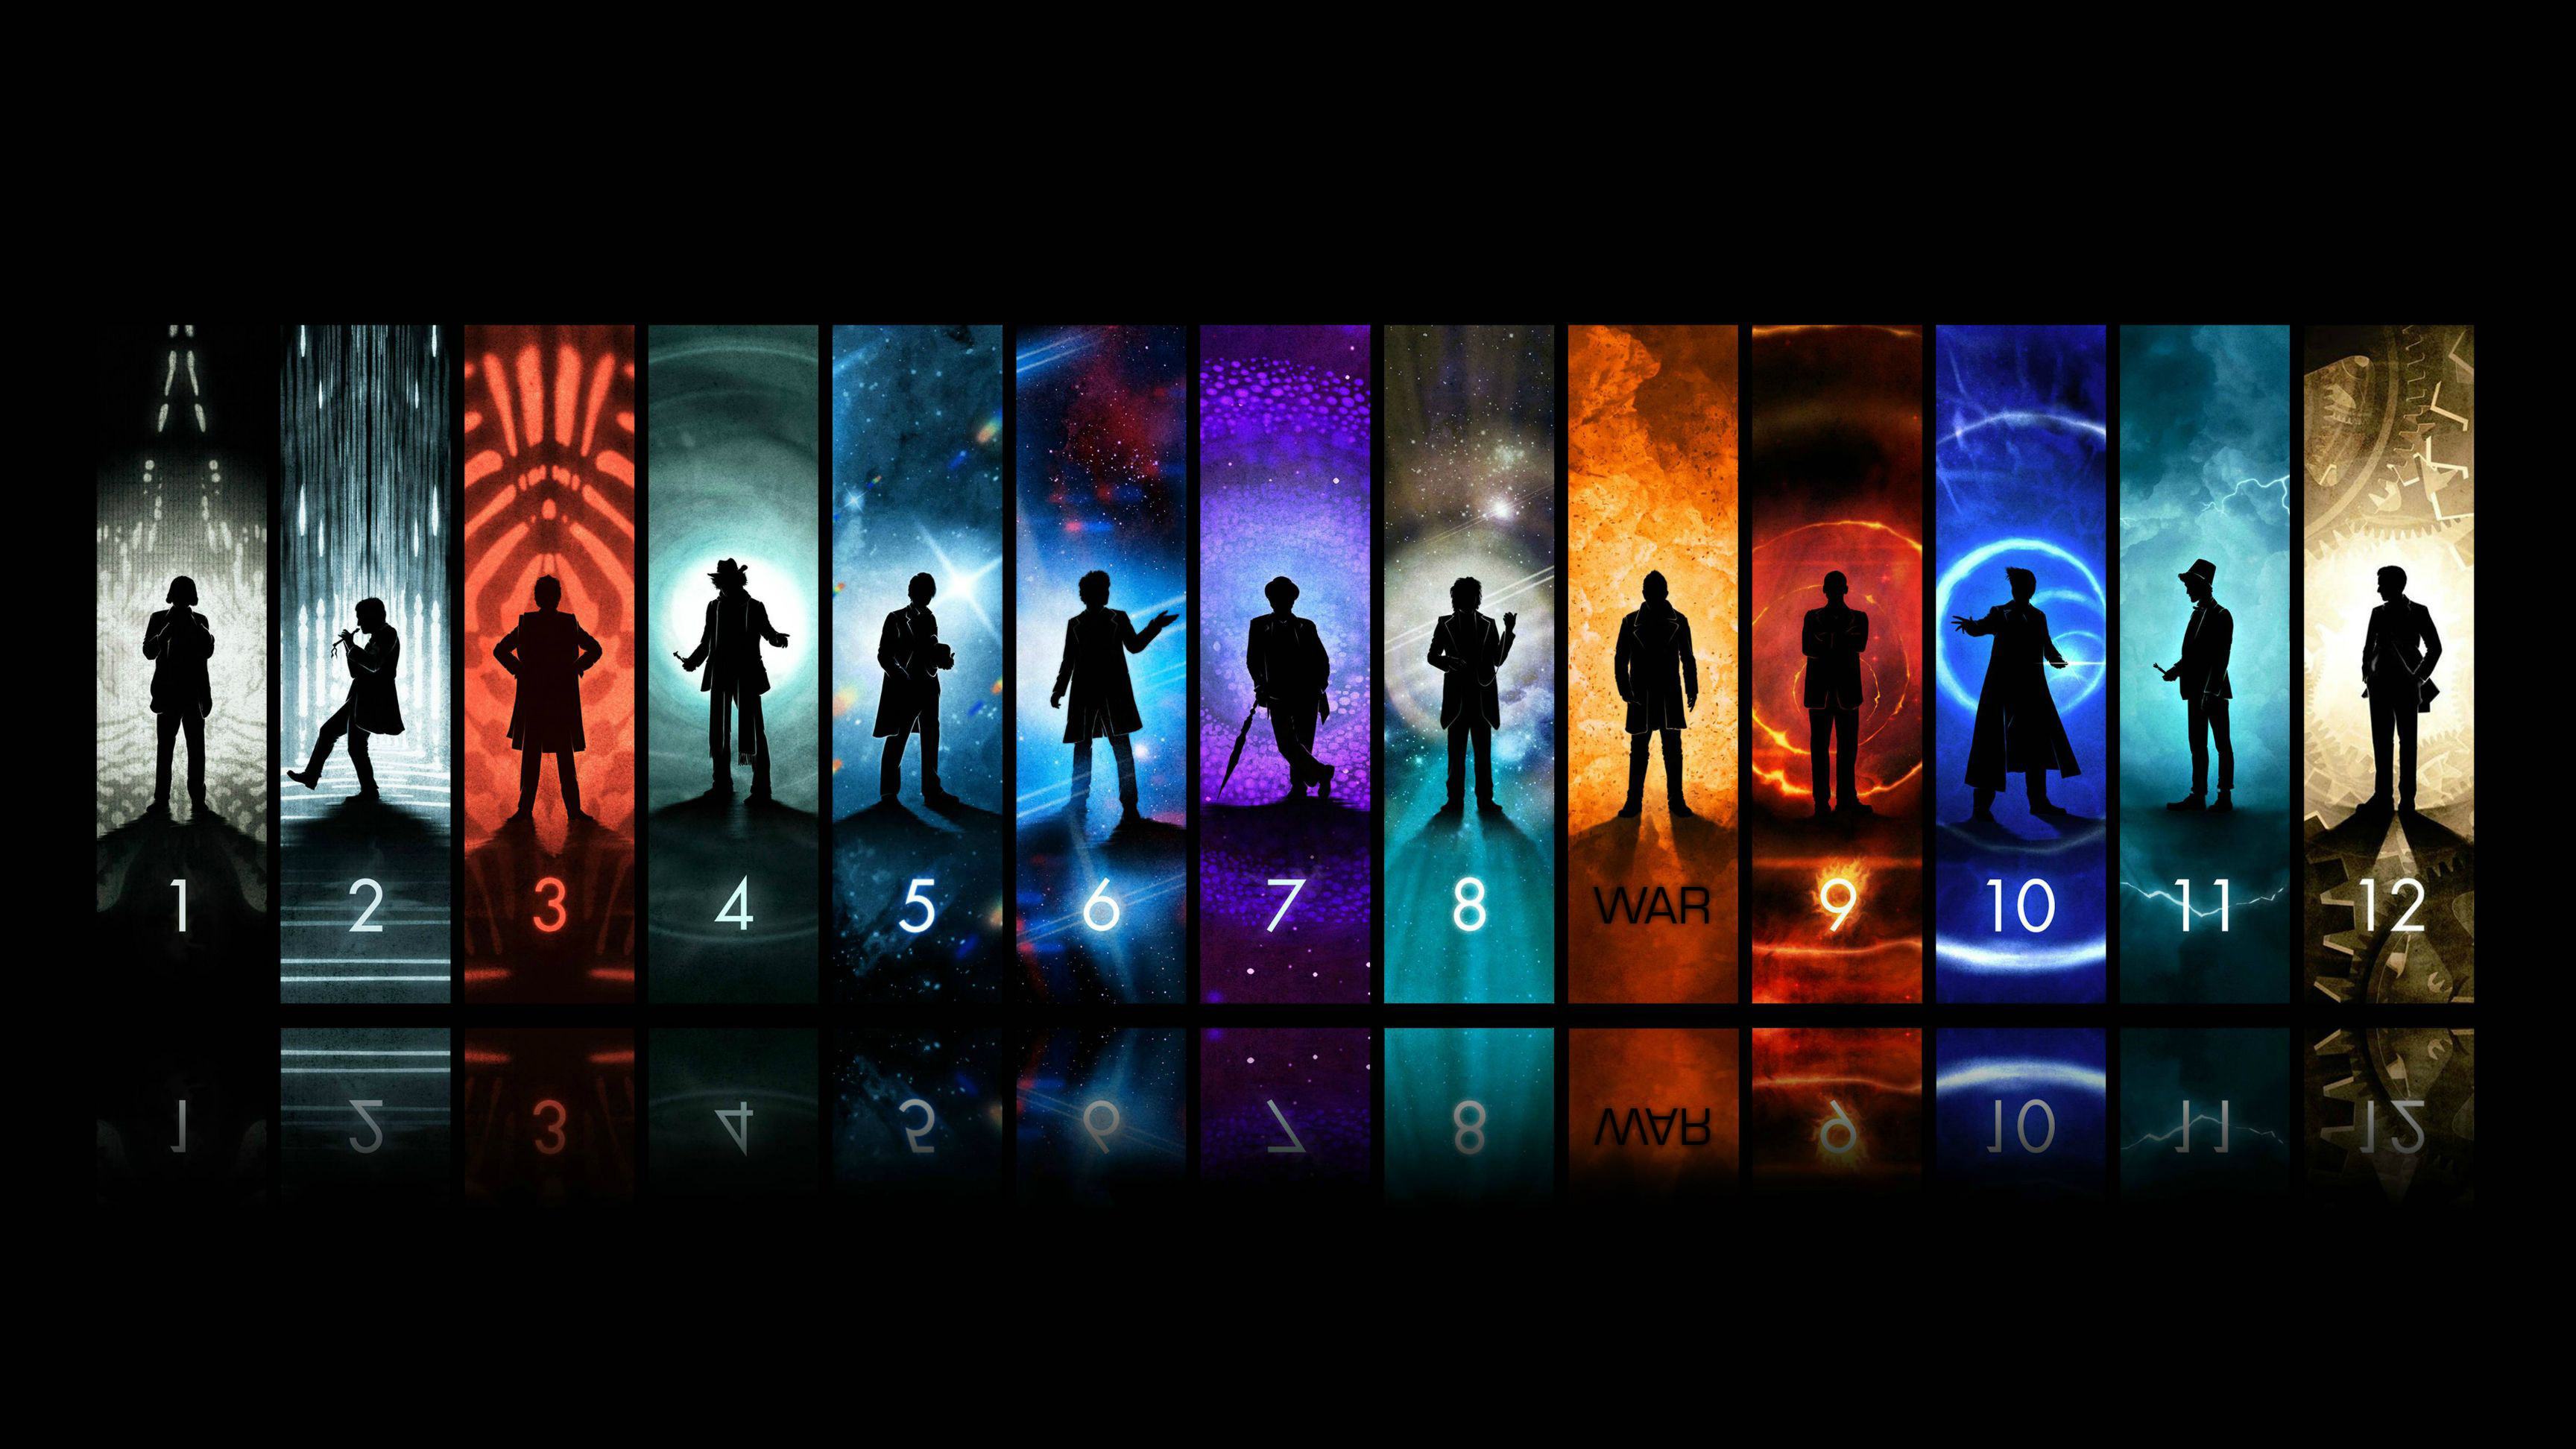 Doctor Who Wallpapers, Pictures, Images - 3456 x 1944 jpeg 866kB